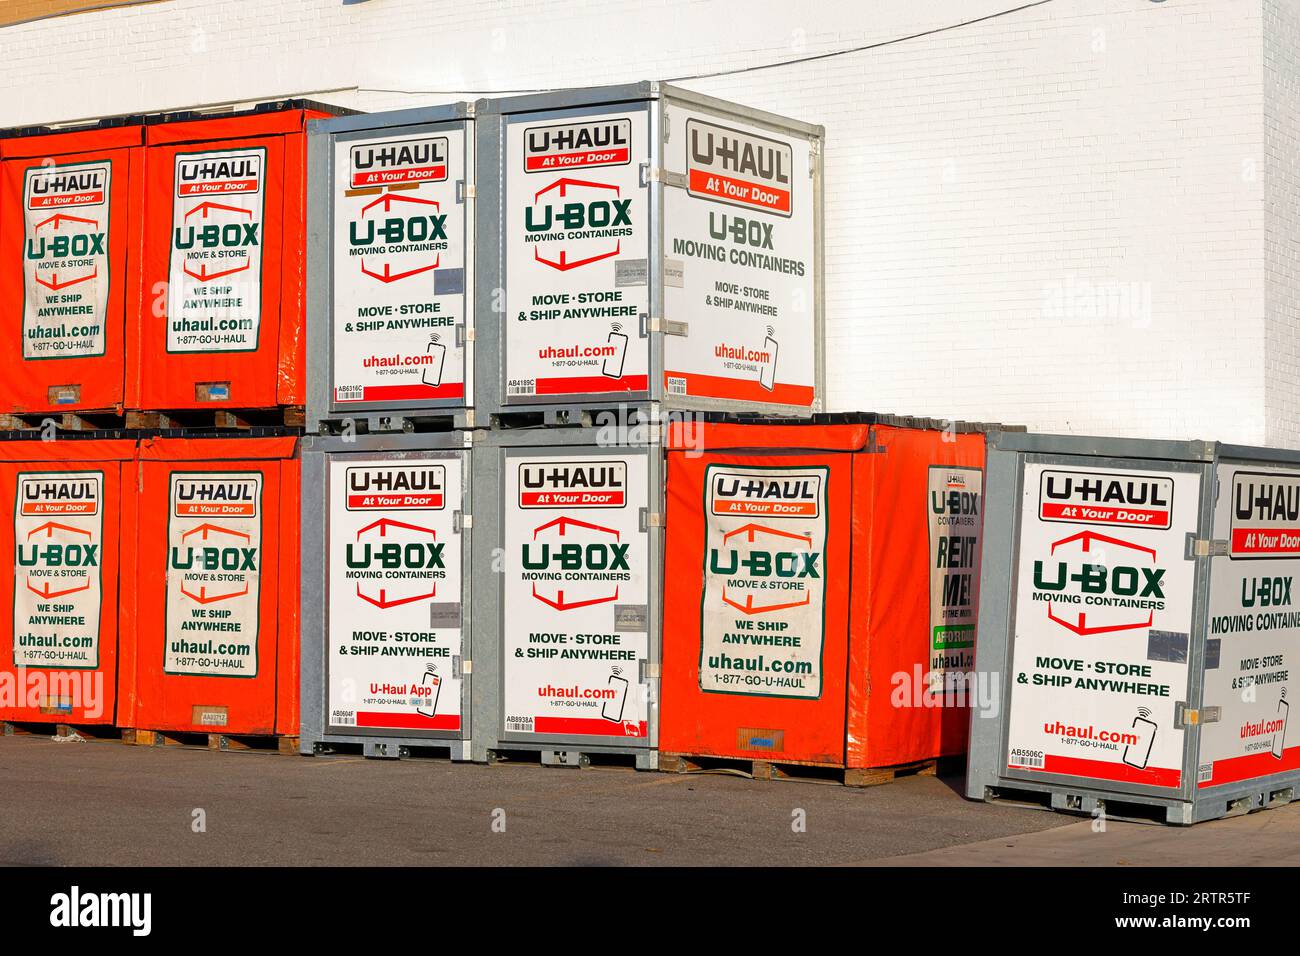 U-Box Moving and Storage container 8x5x7